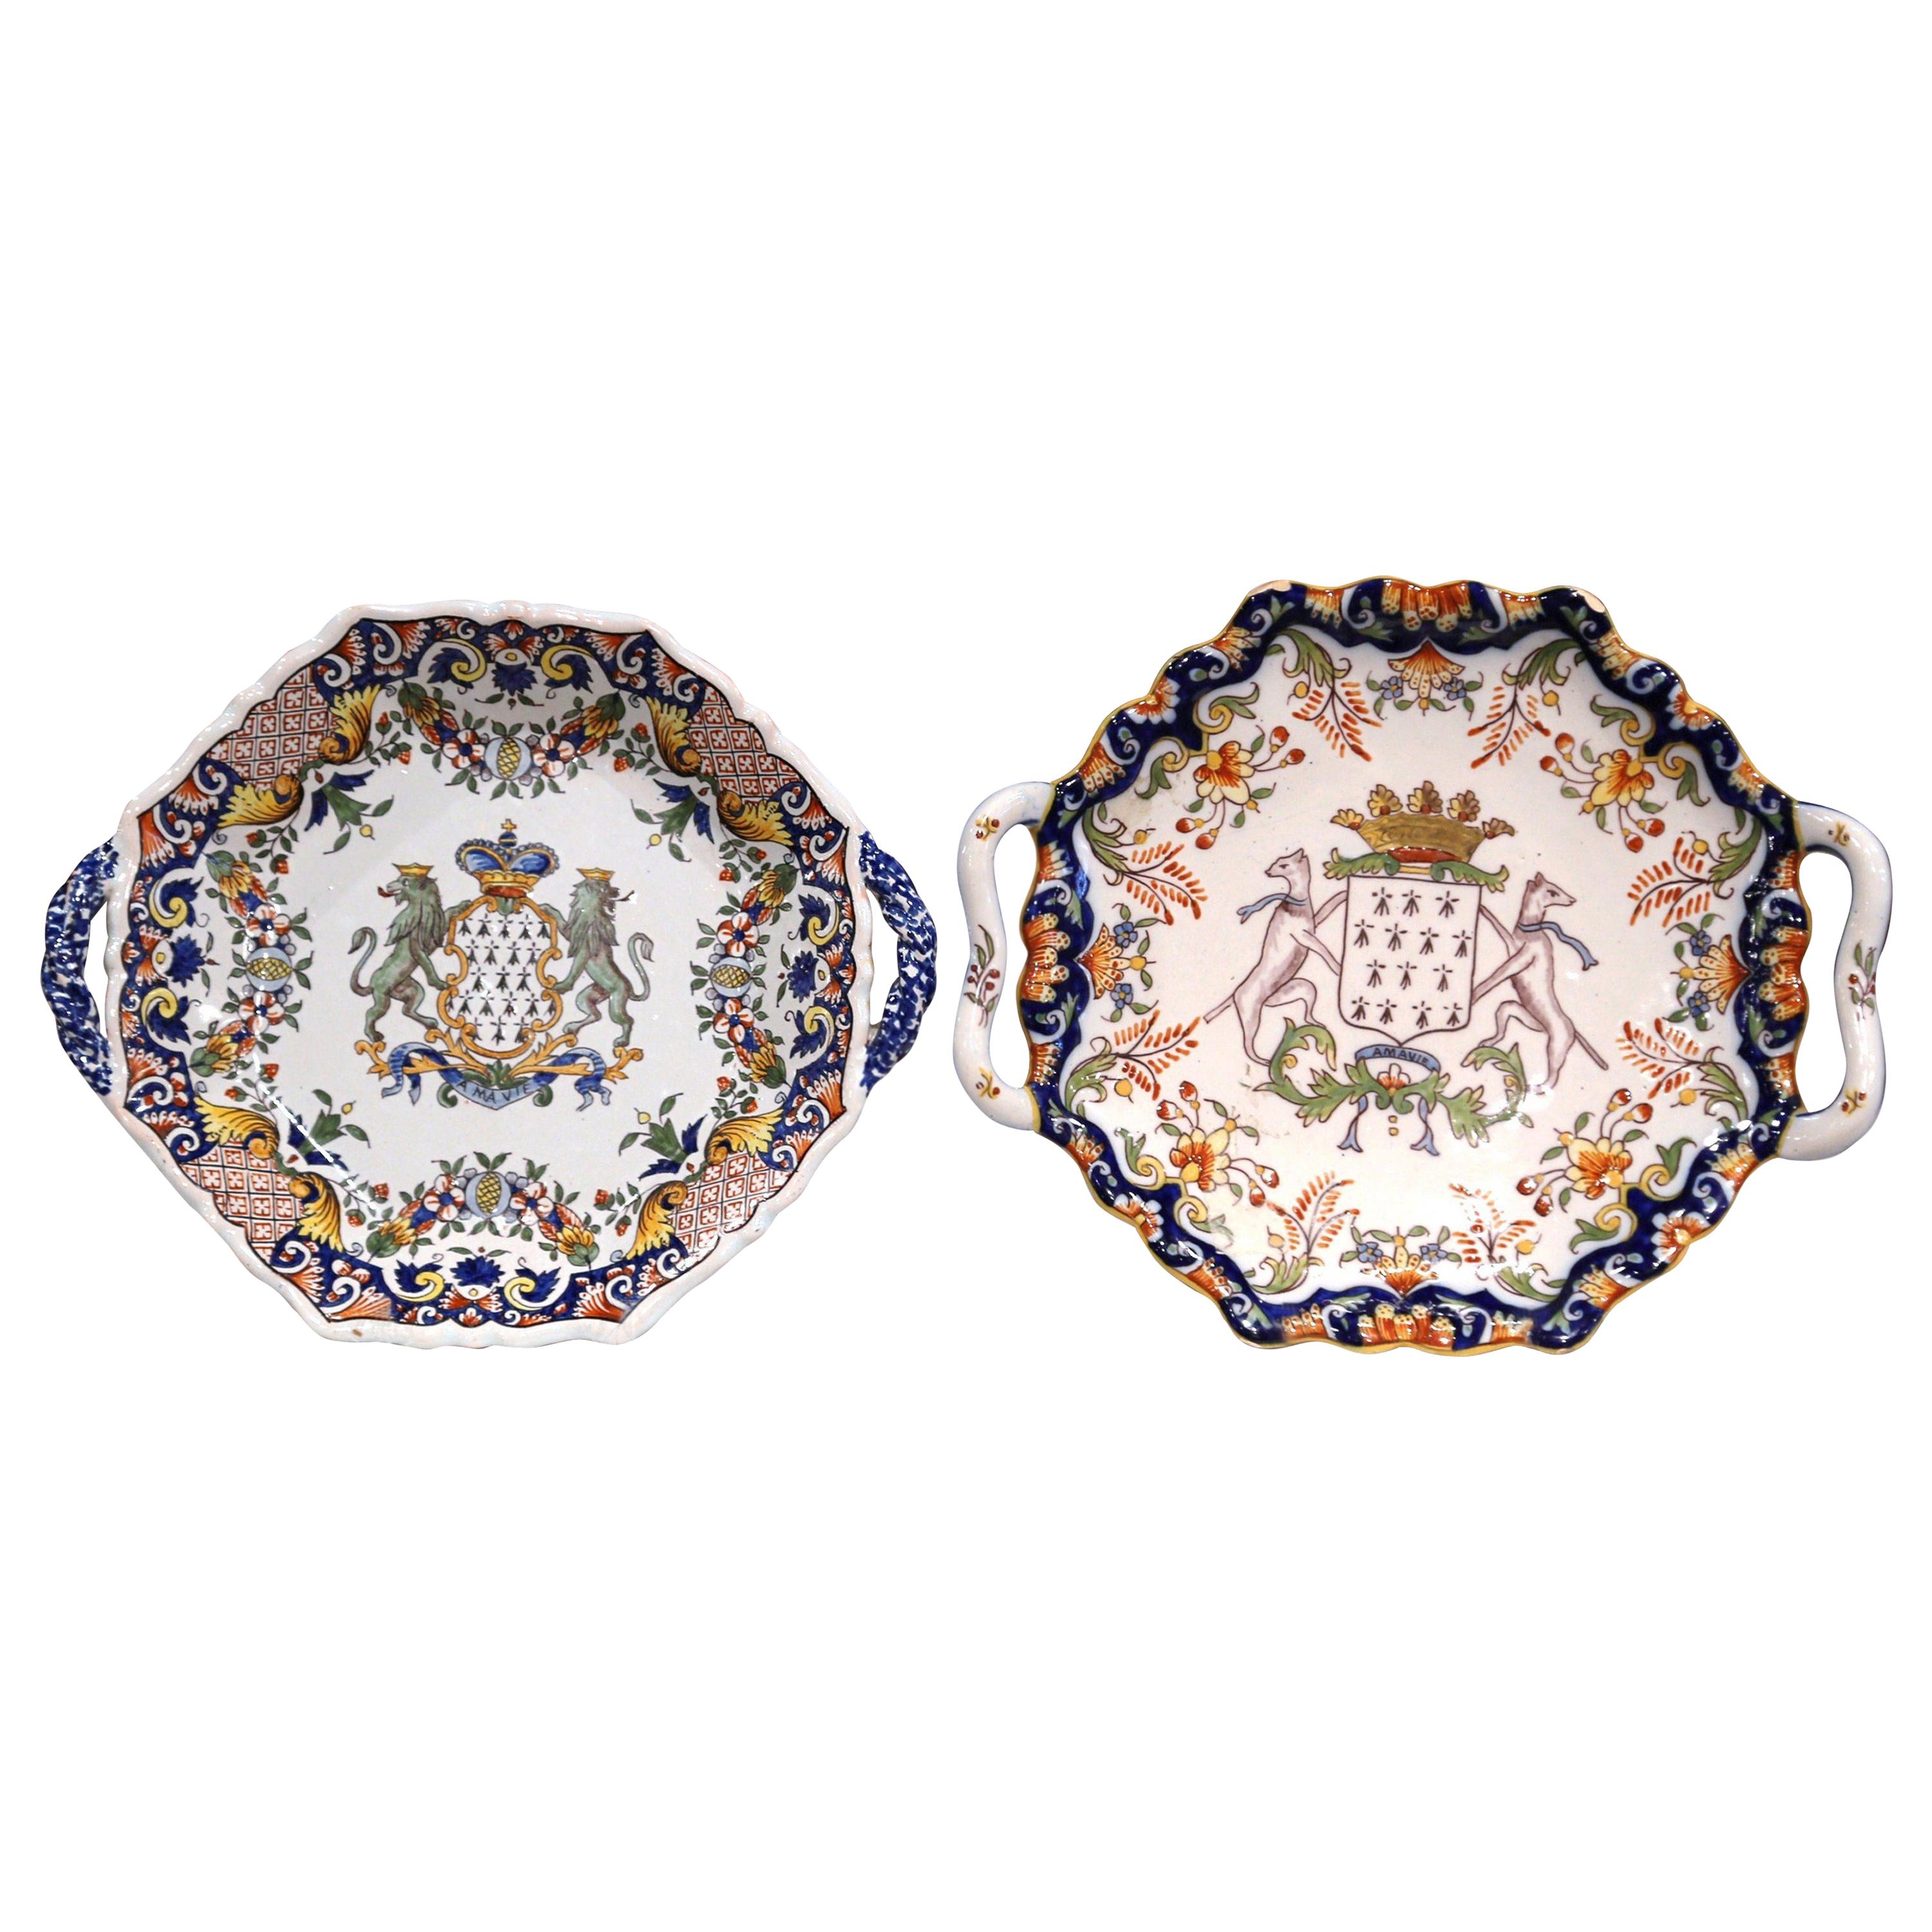 Two Mid-20th Century French Hand Painted Faience Wall Plates from Brittany For Sale